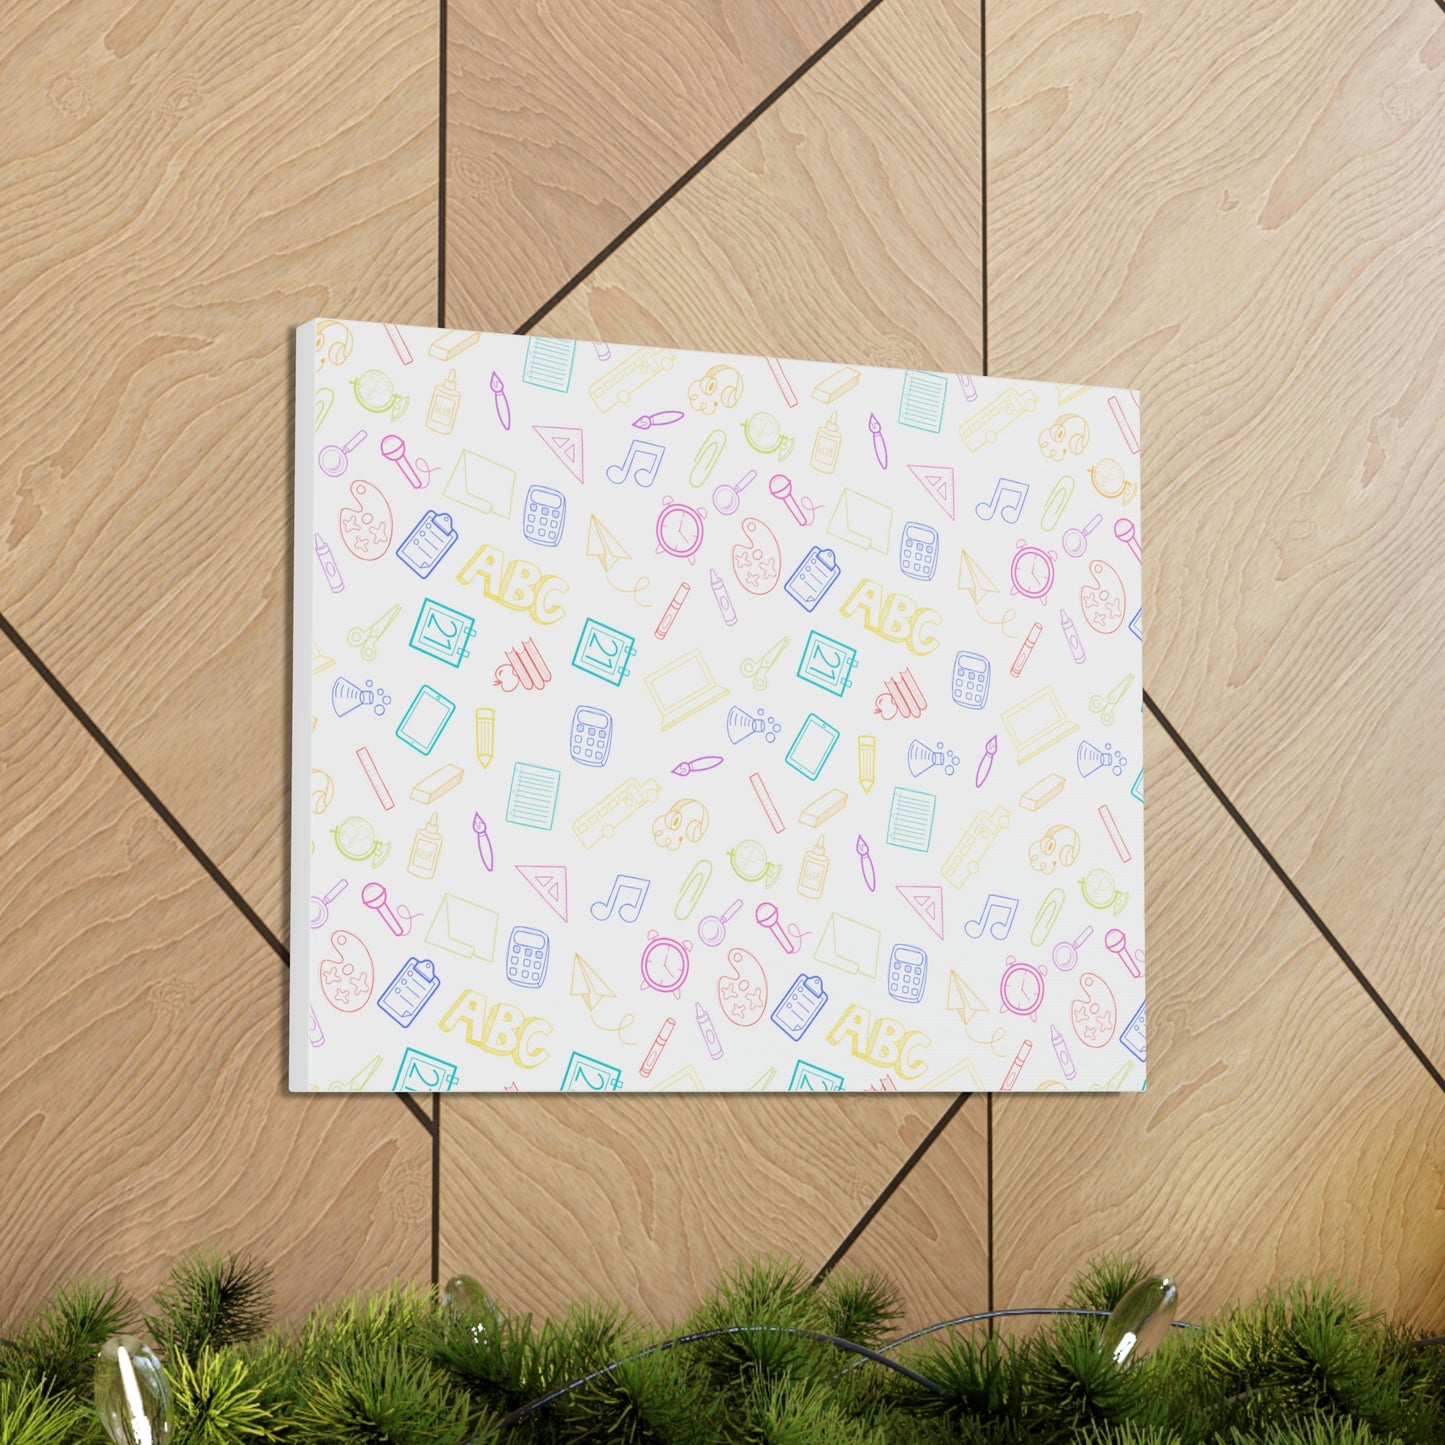 Elementary Canvas Print (20 x 16 in)